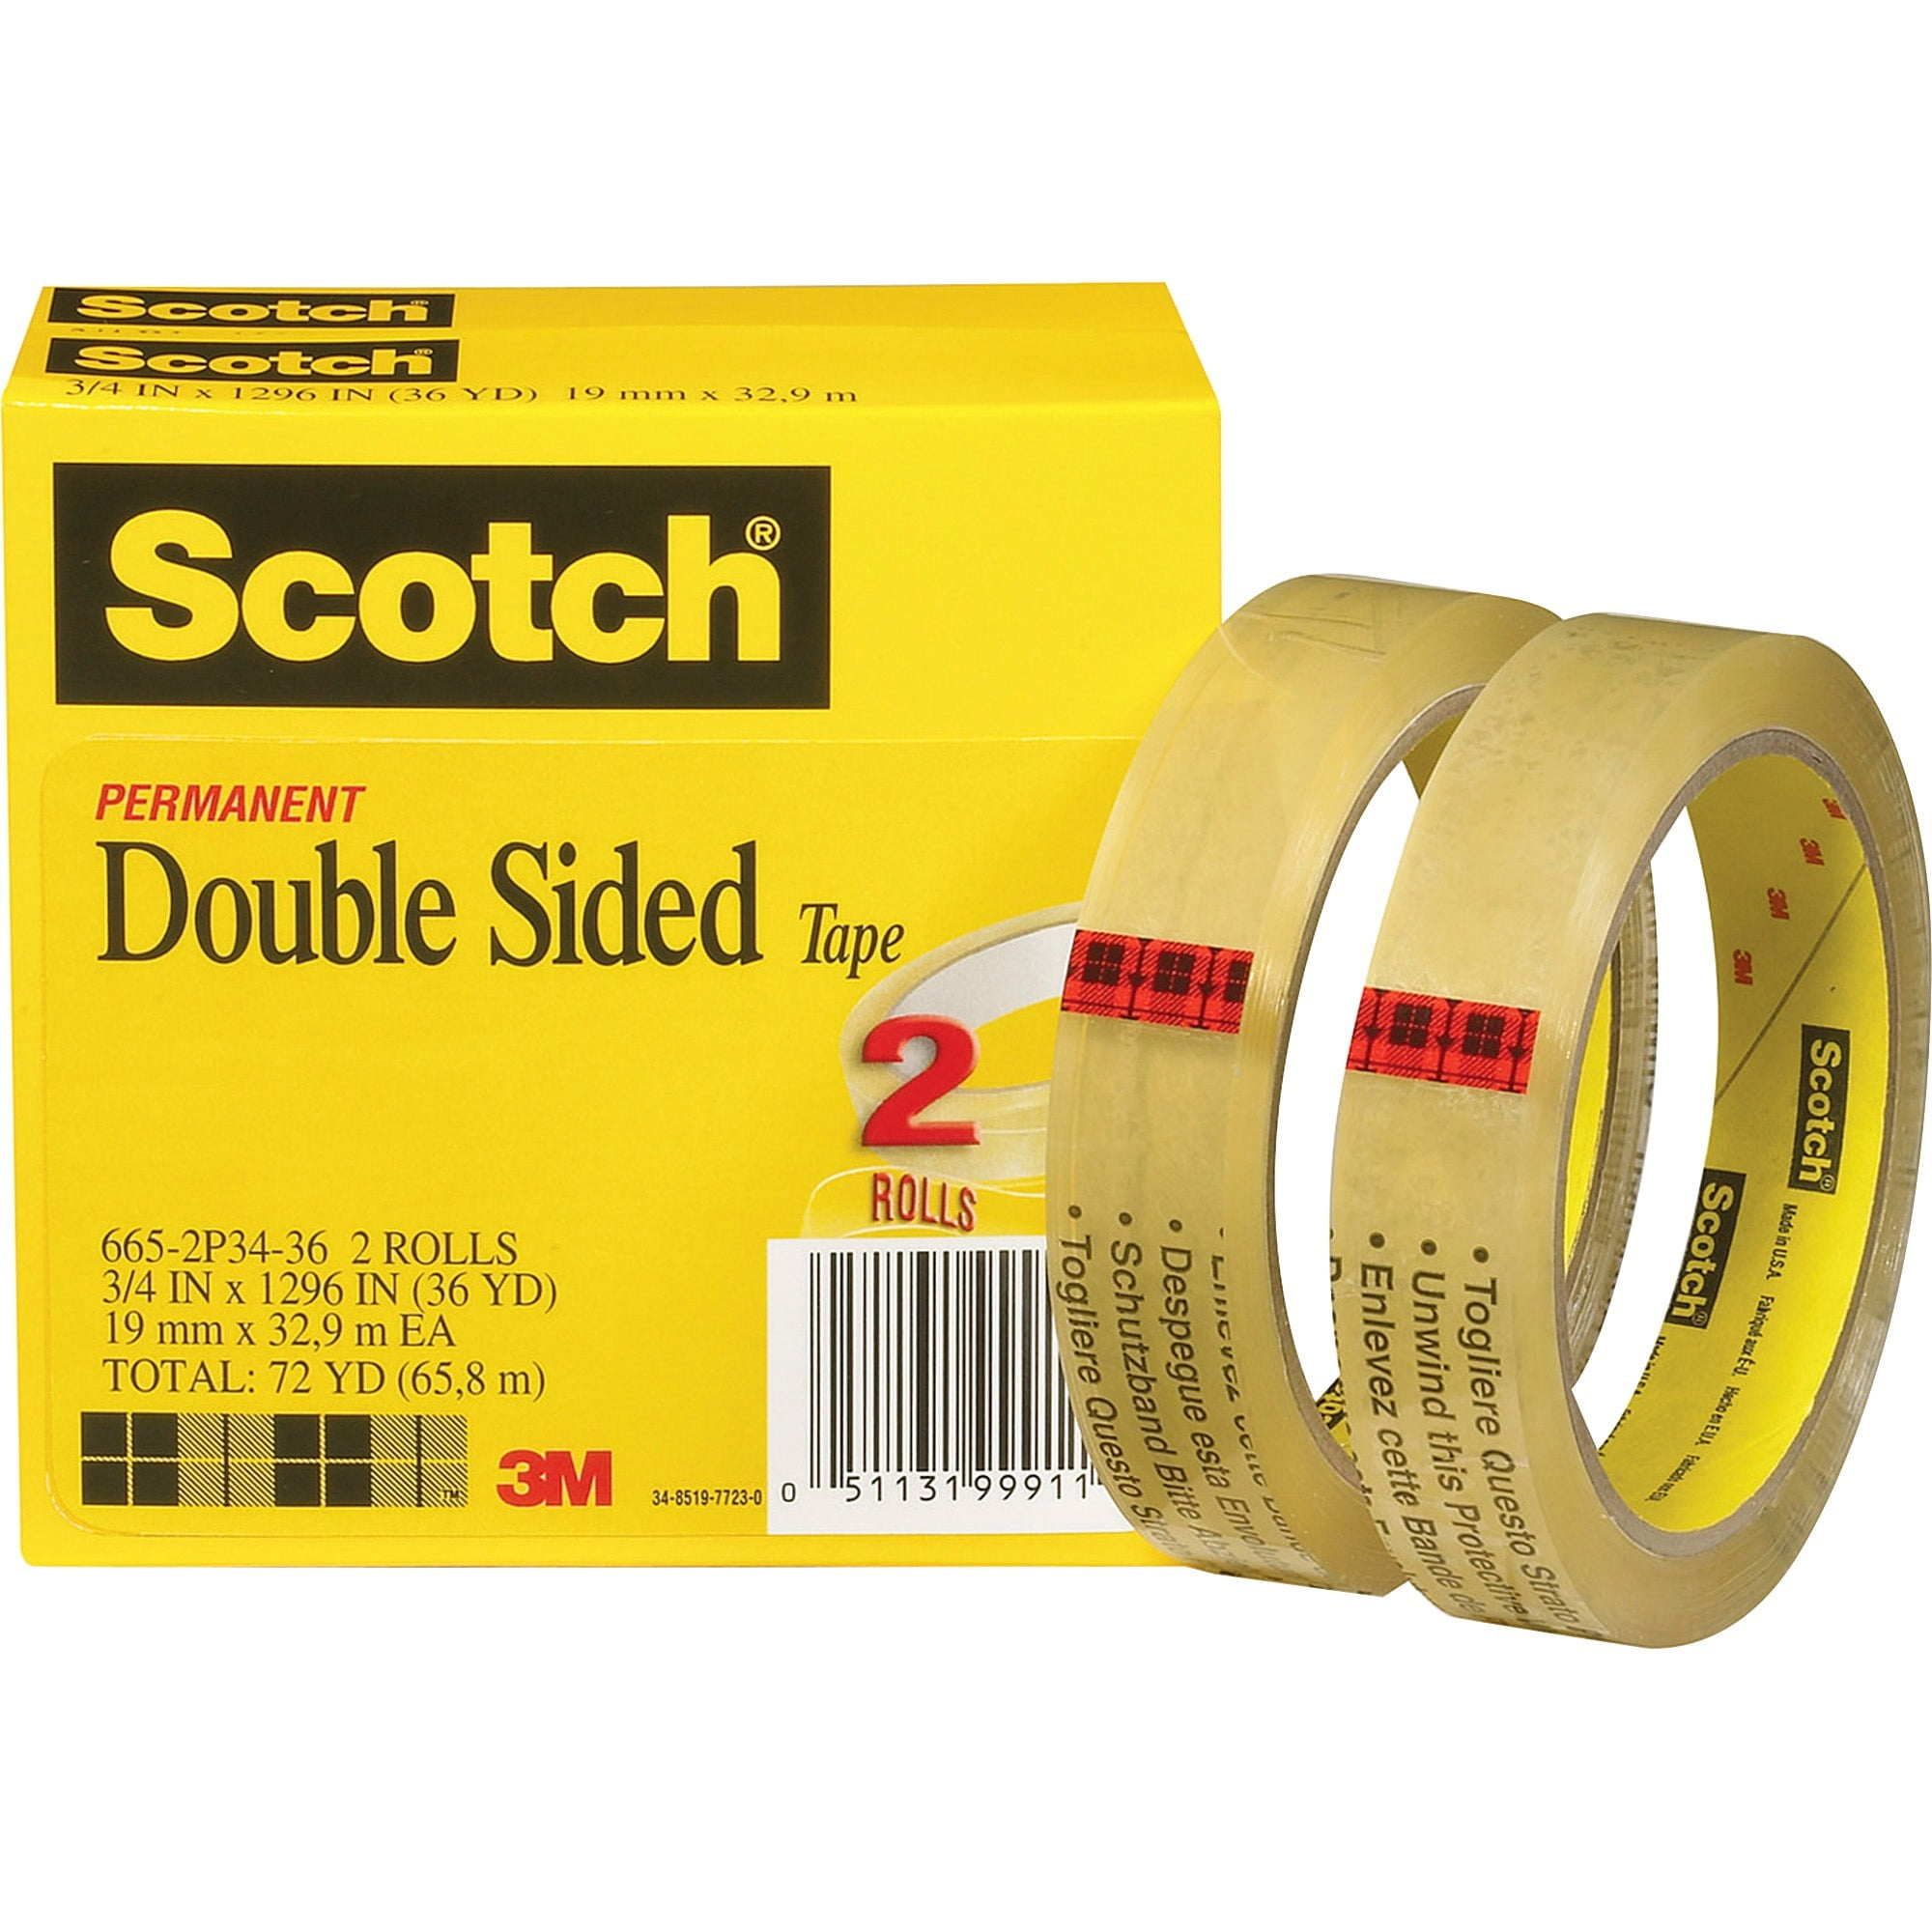 Scotch ATG Tape Refill Rolls Double Sided 2pk 